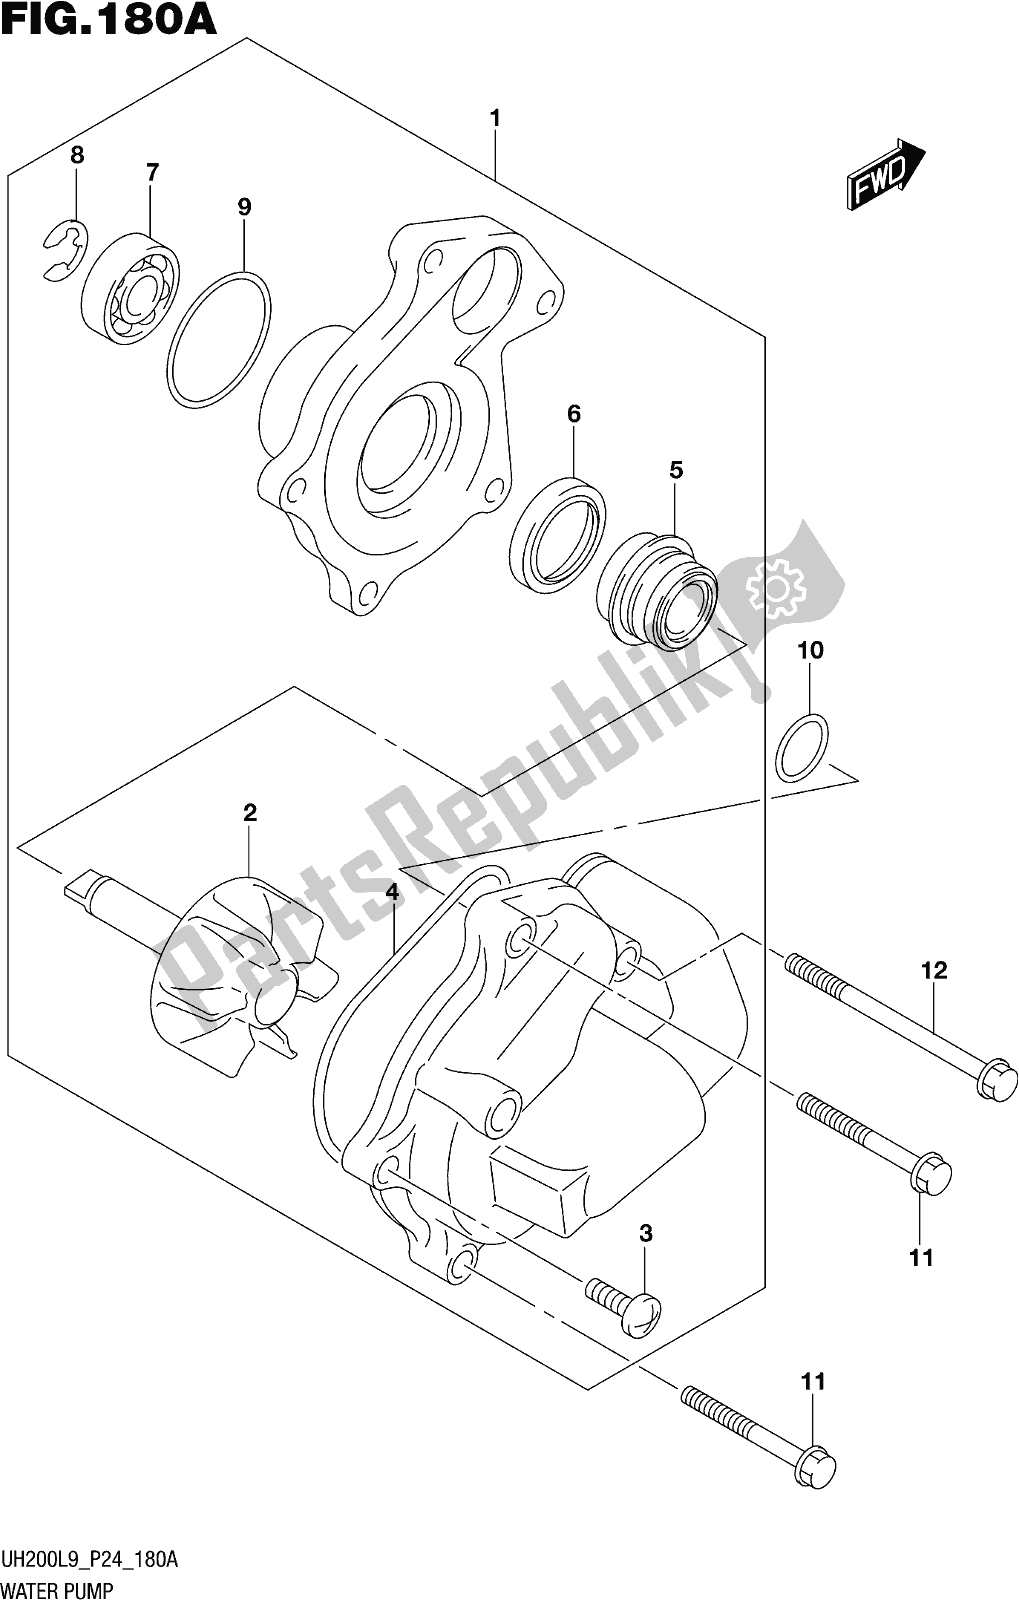 All parts for the Fig. 180a Water Pump of the Suzuki UH 200 2019